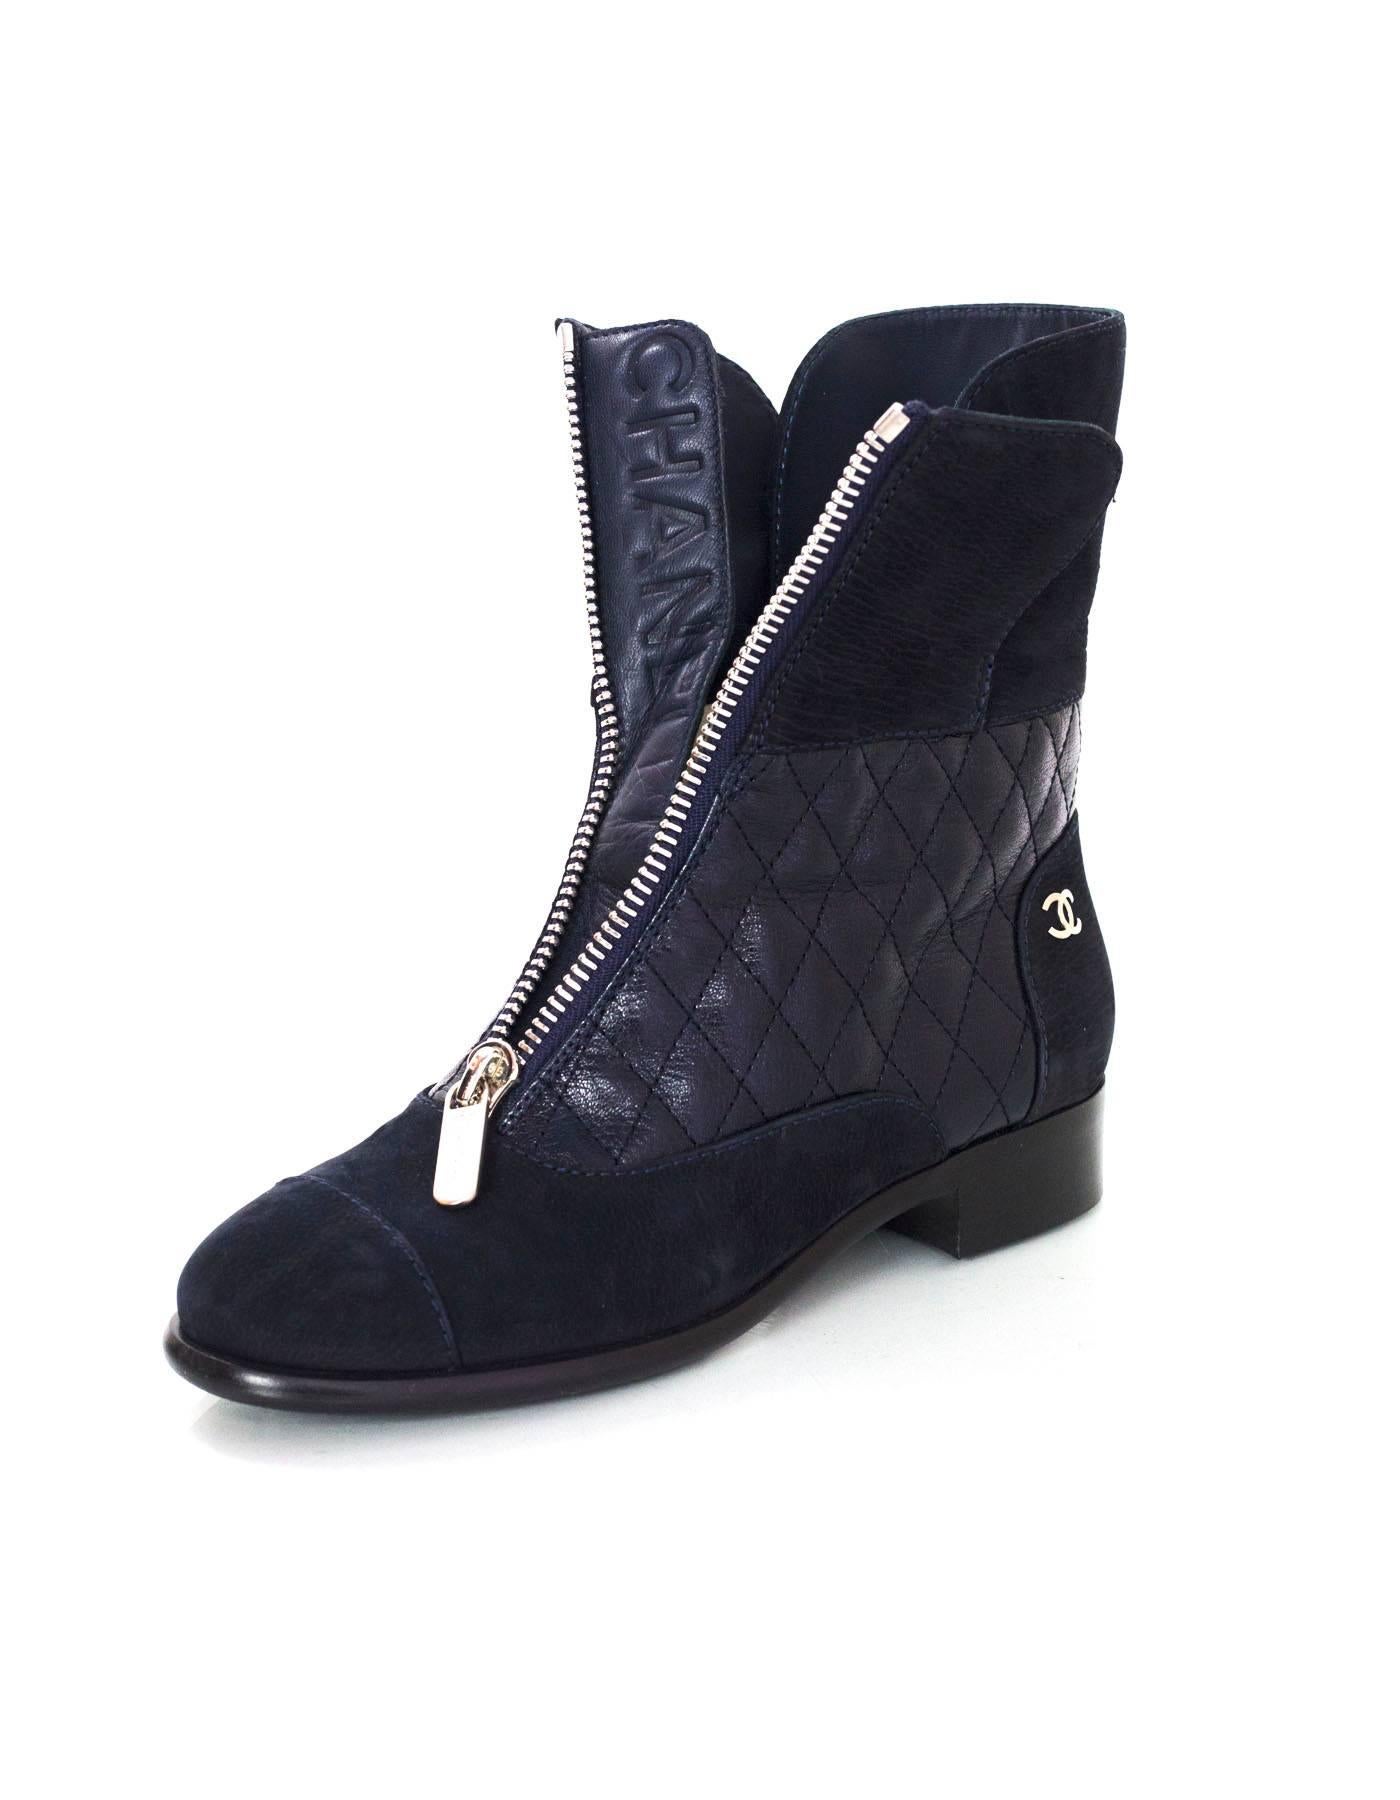 Black Chanel Navy Suede & Quilted Leather Zip Front Boots sz 37